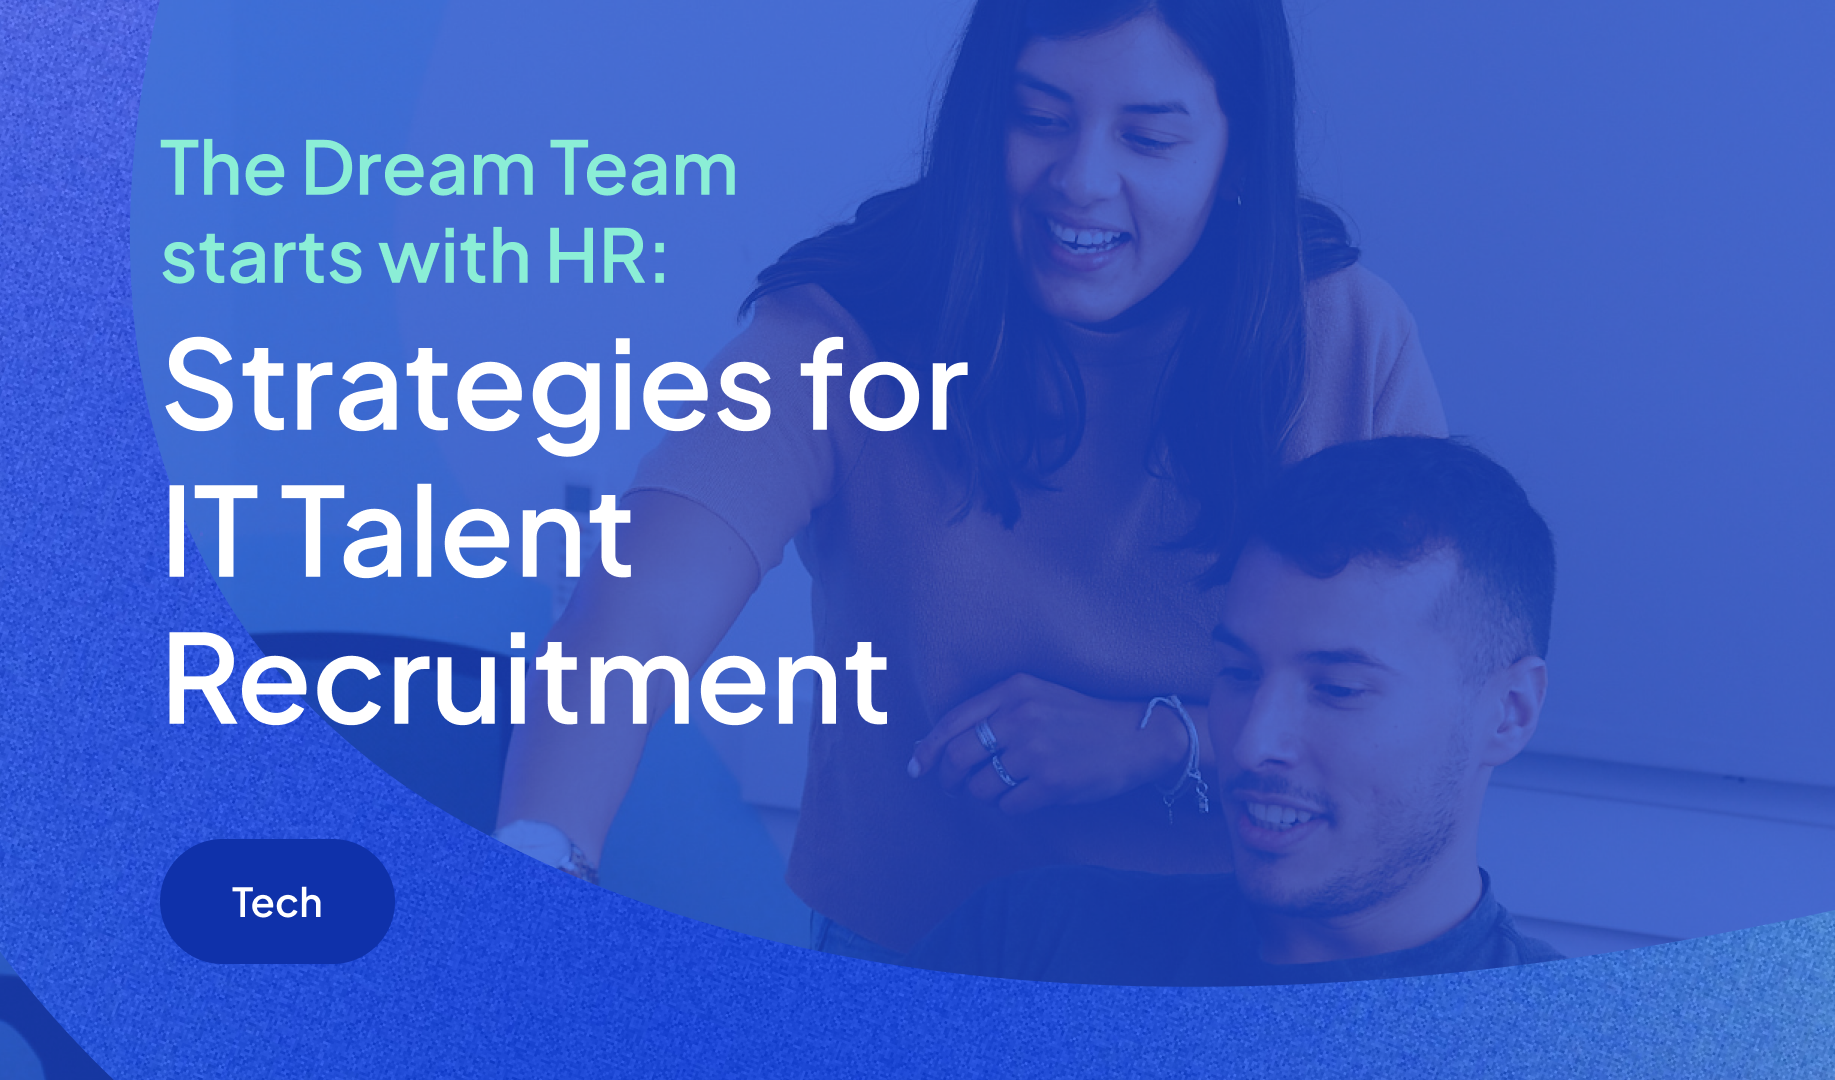 The Dream Team starts with HR: Strategies for IT Talent Recruitment